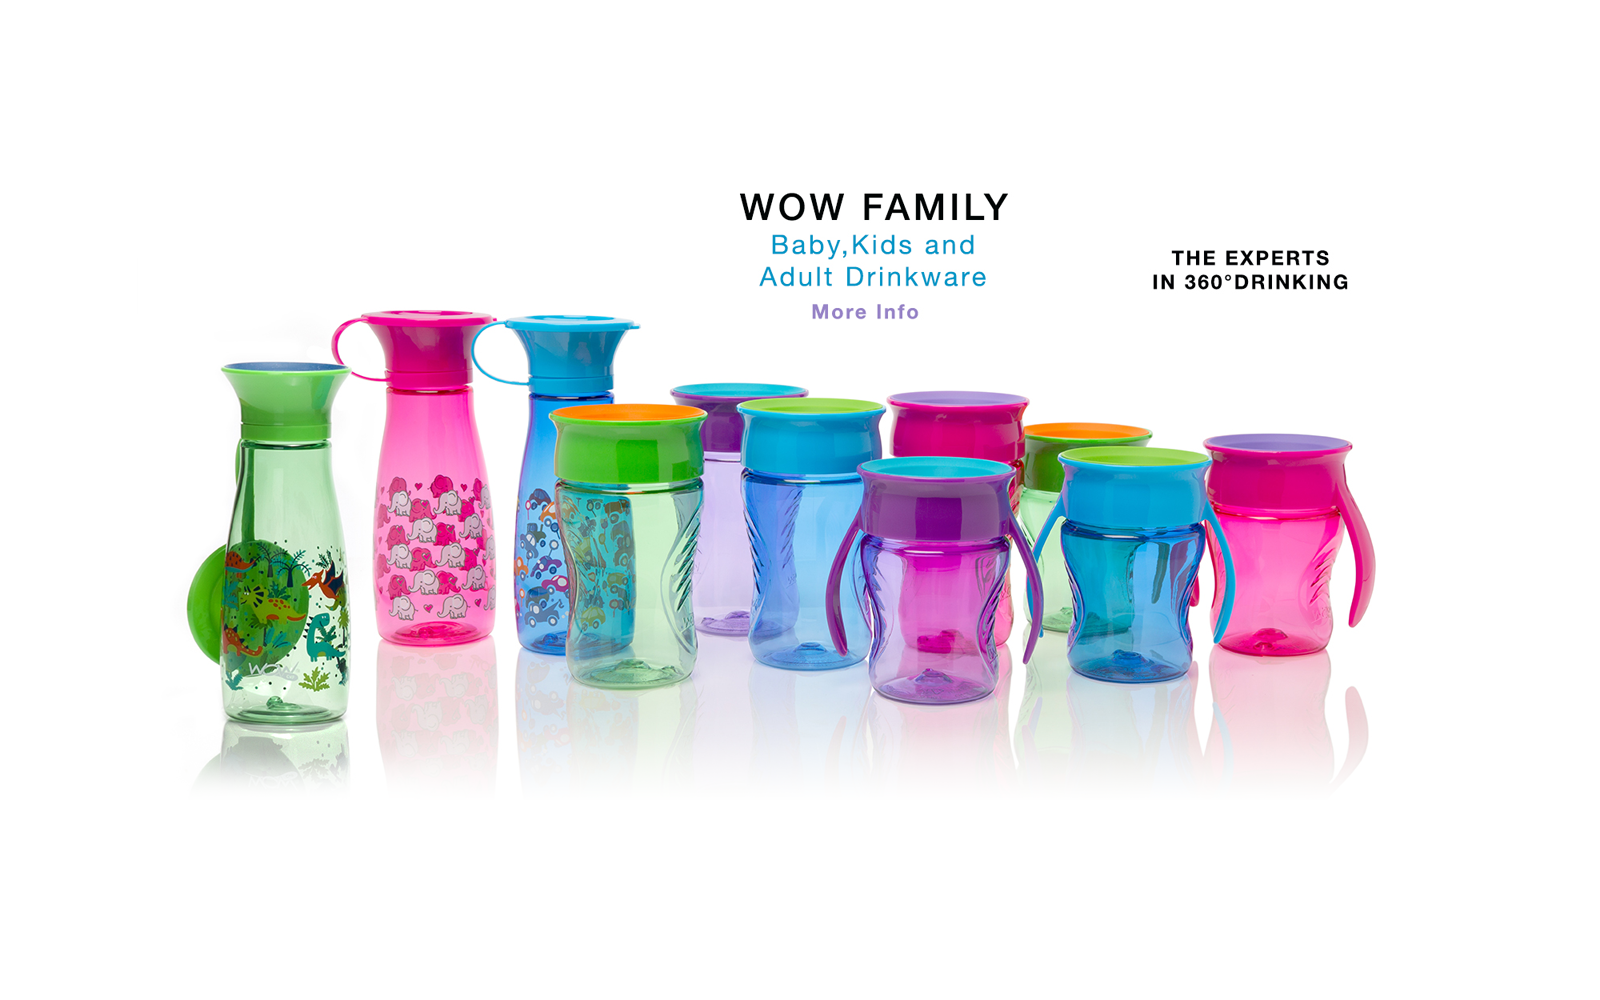 WOW GEAR - Home of the 360 WOW CUP Drinking Cups and Water bottles